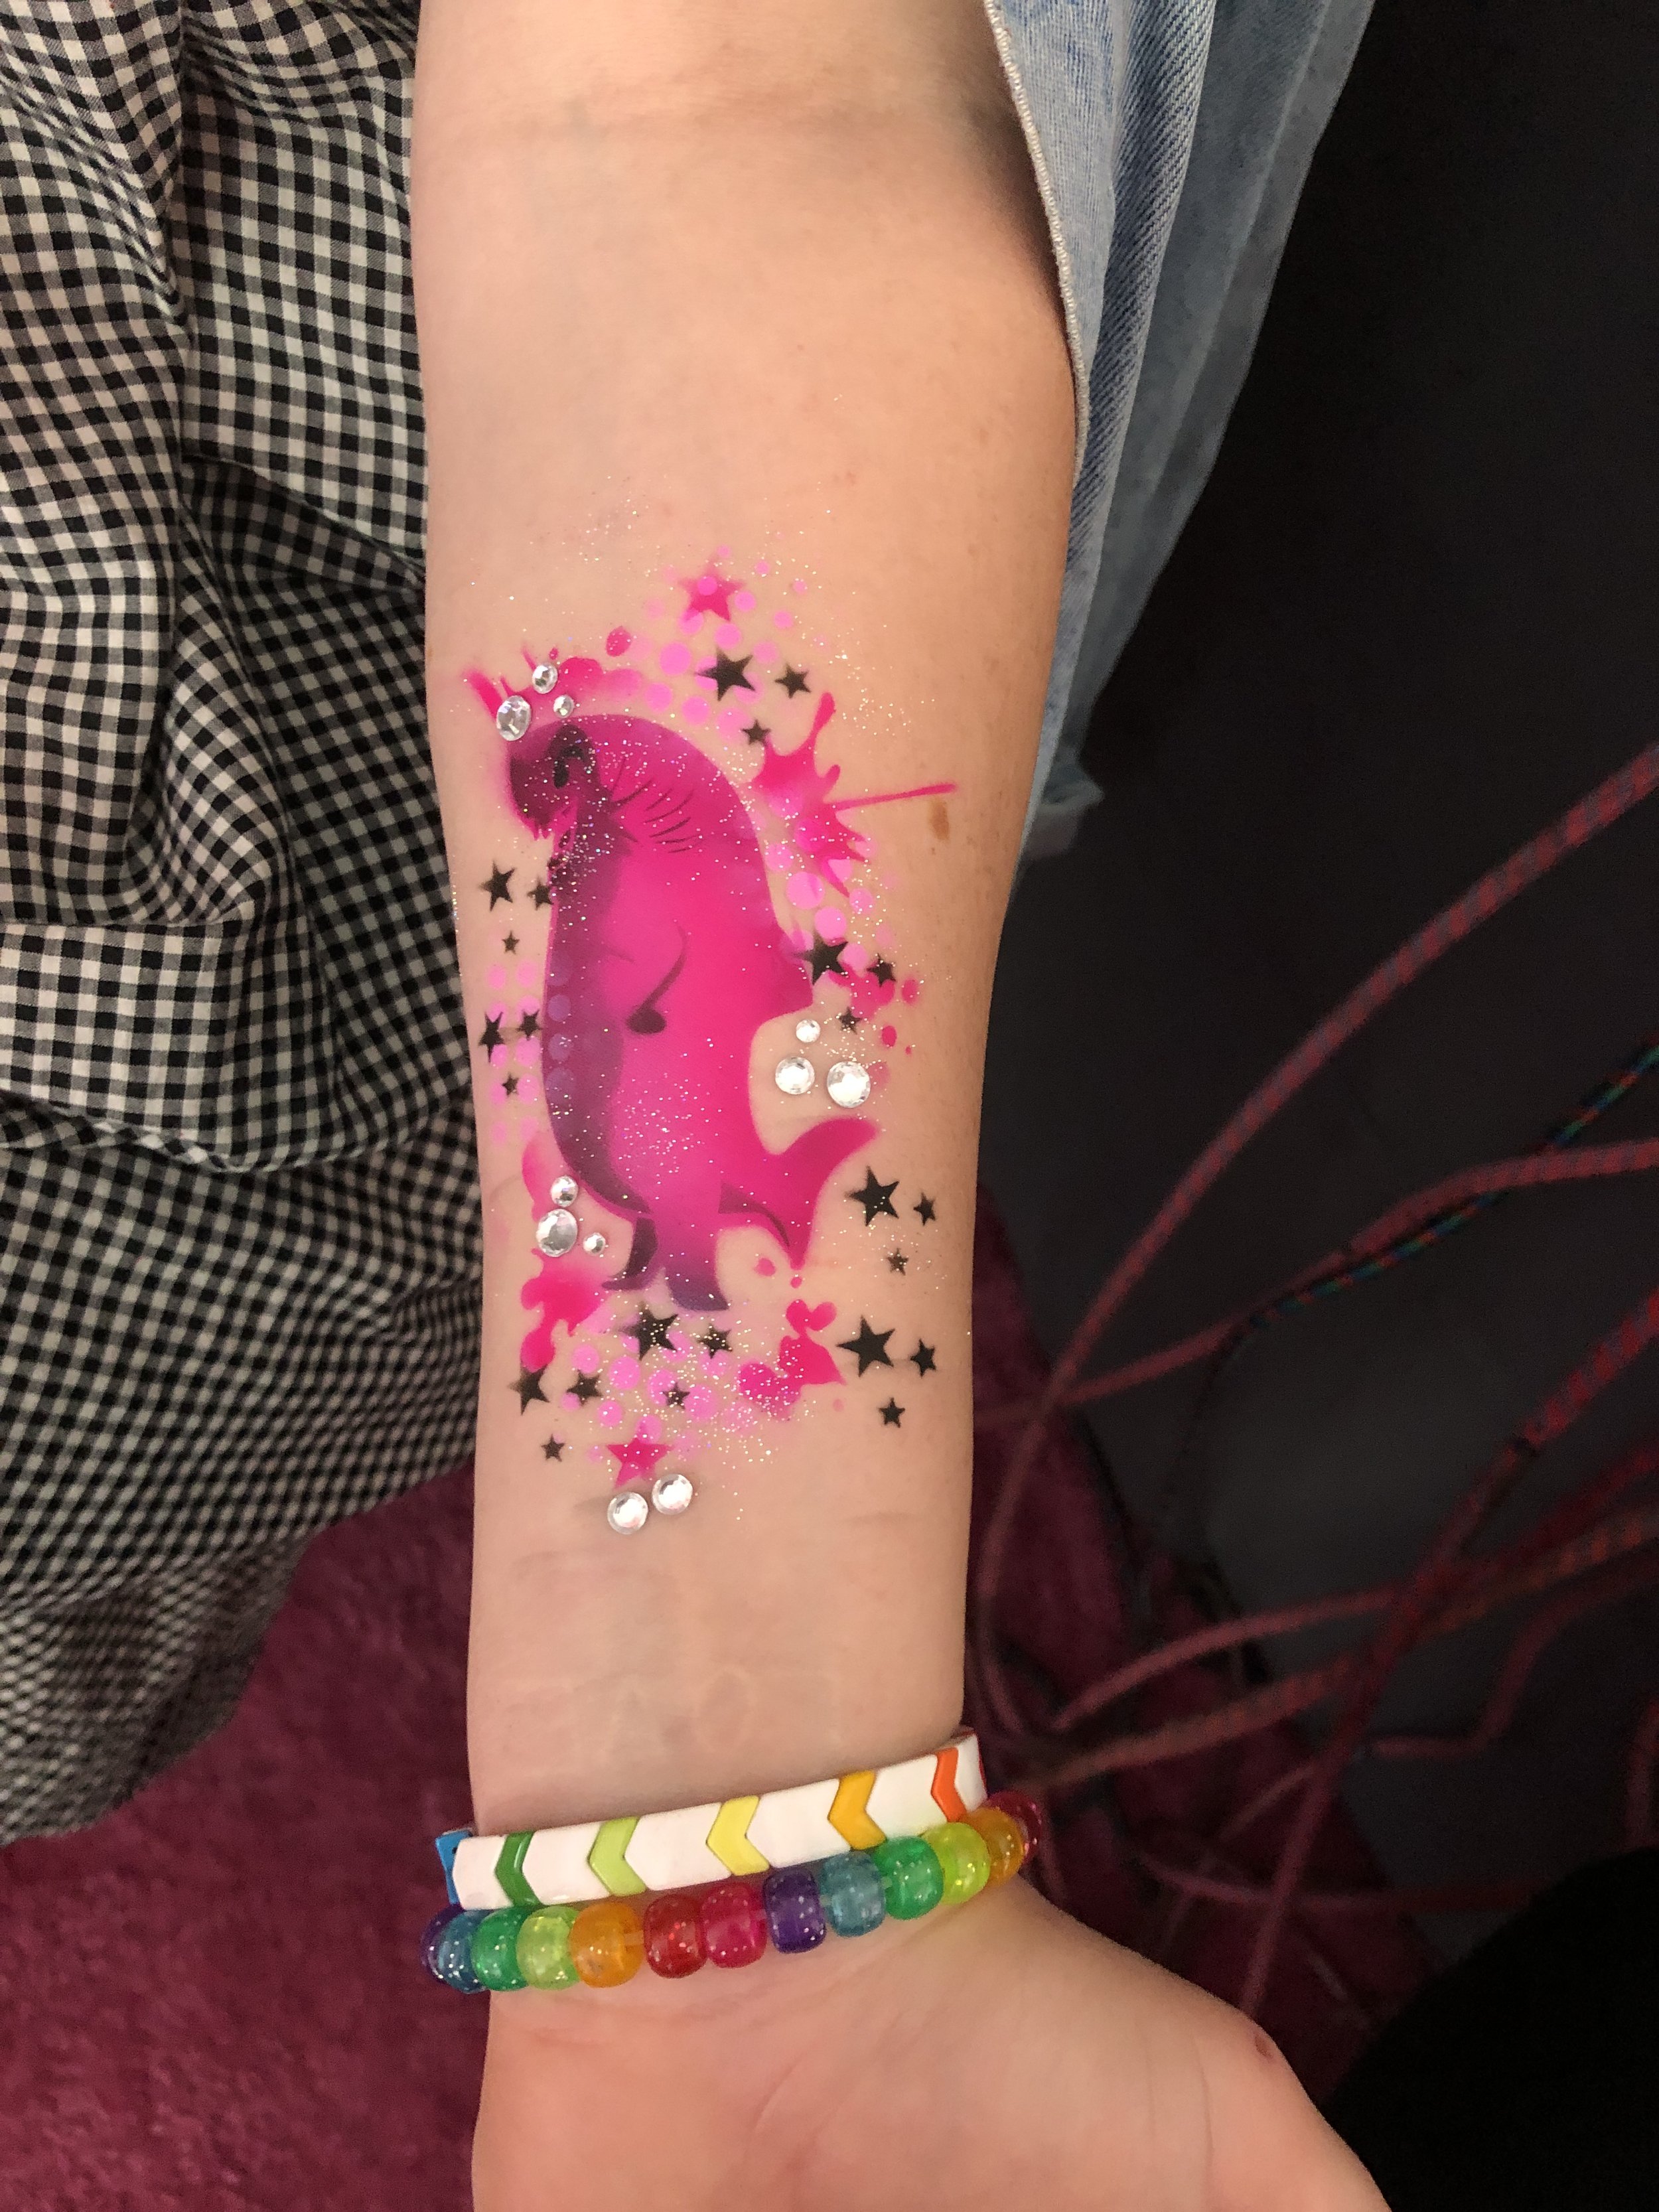 Airbrush Tattoos for Parties Near Me NYC.JPG